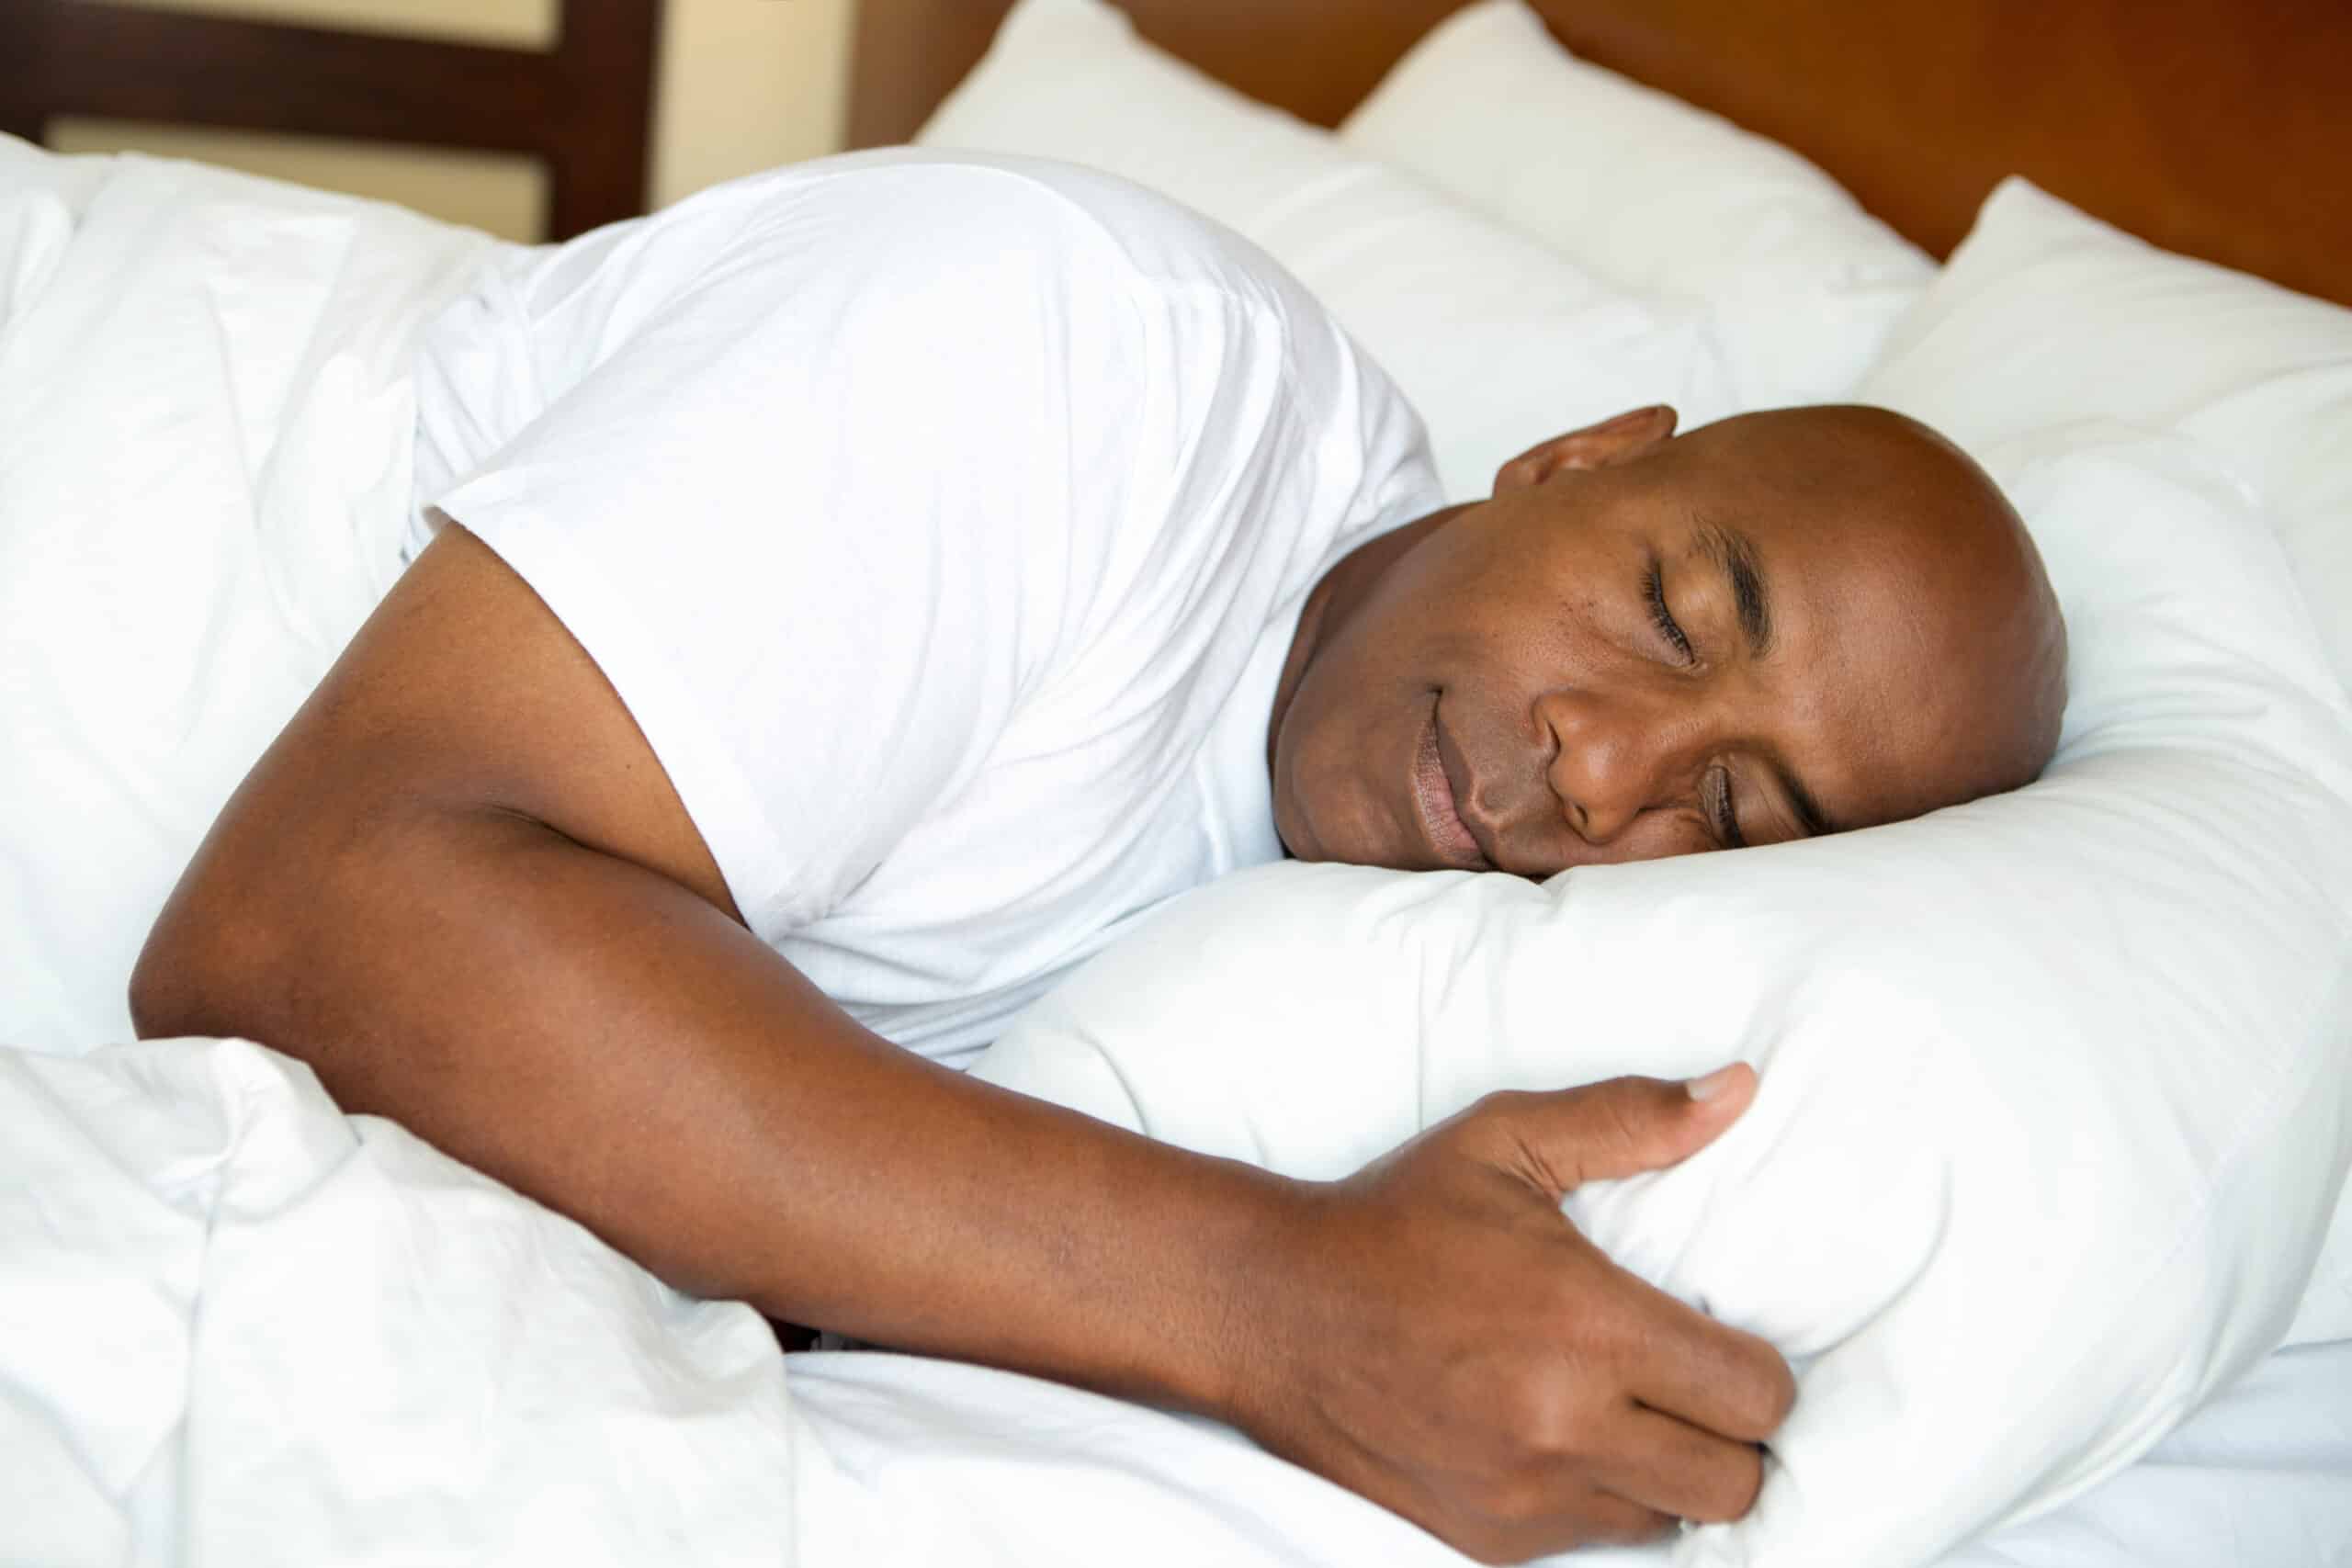 Man sleeps soundly in bed